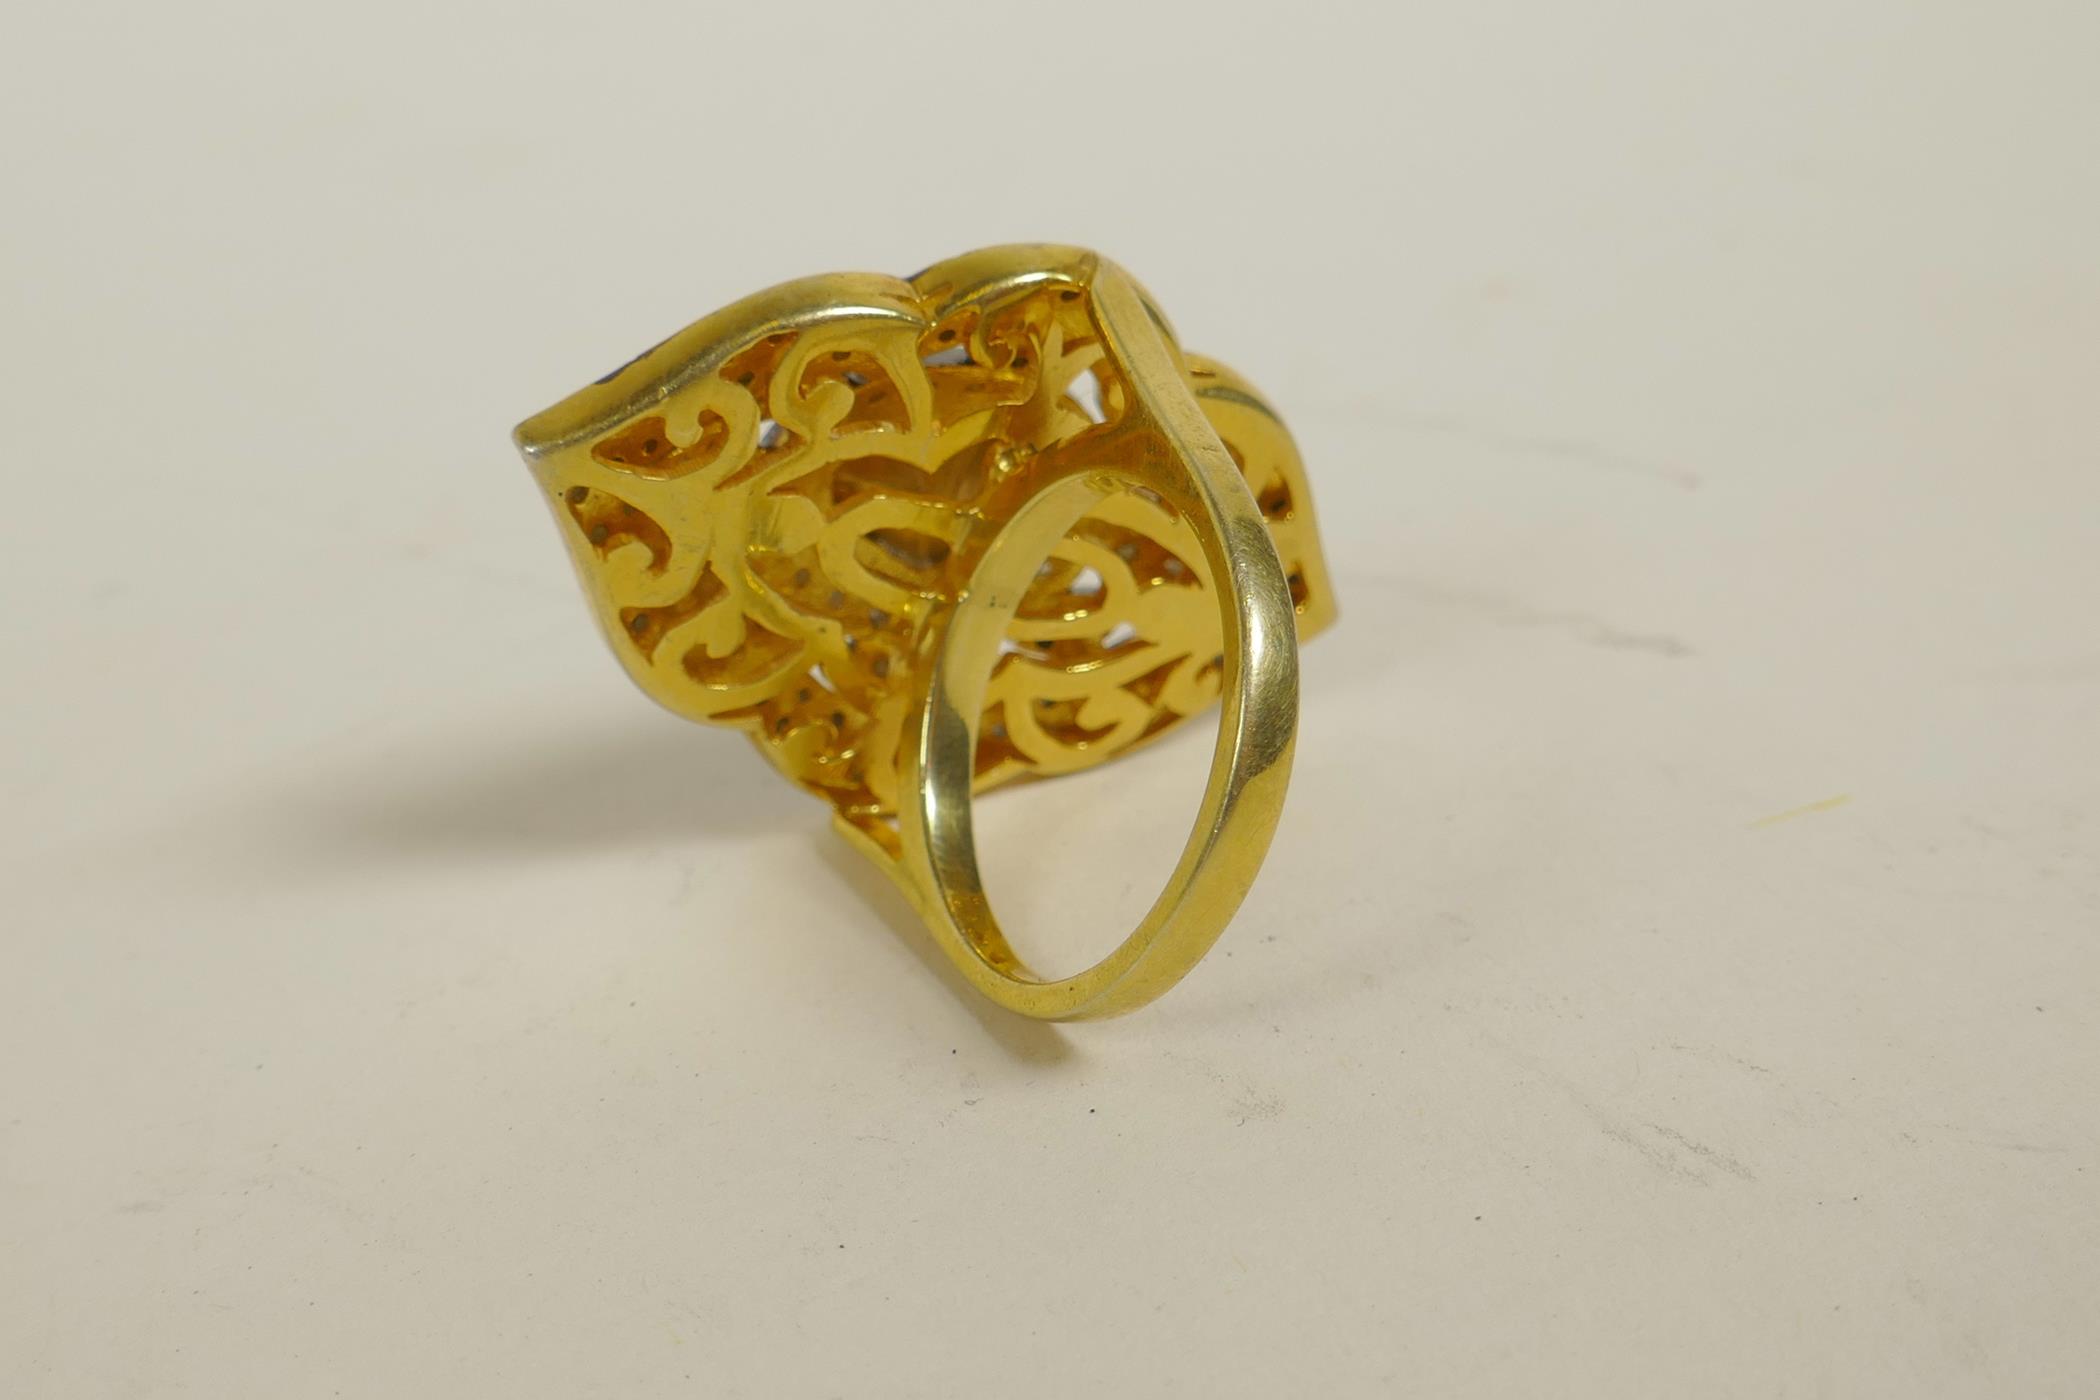 A silver gilt dress ring of diamond form, set with uncut diamonds - Image 3 of 3